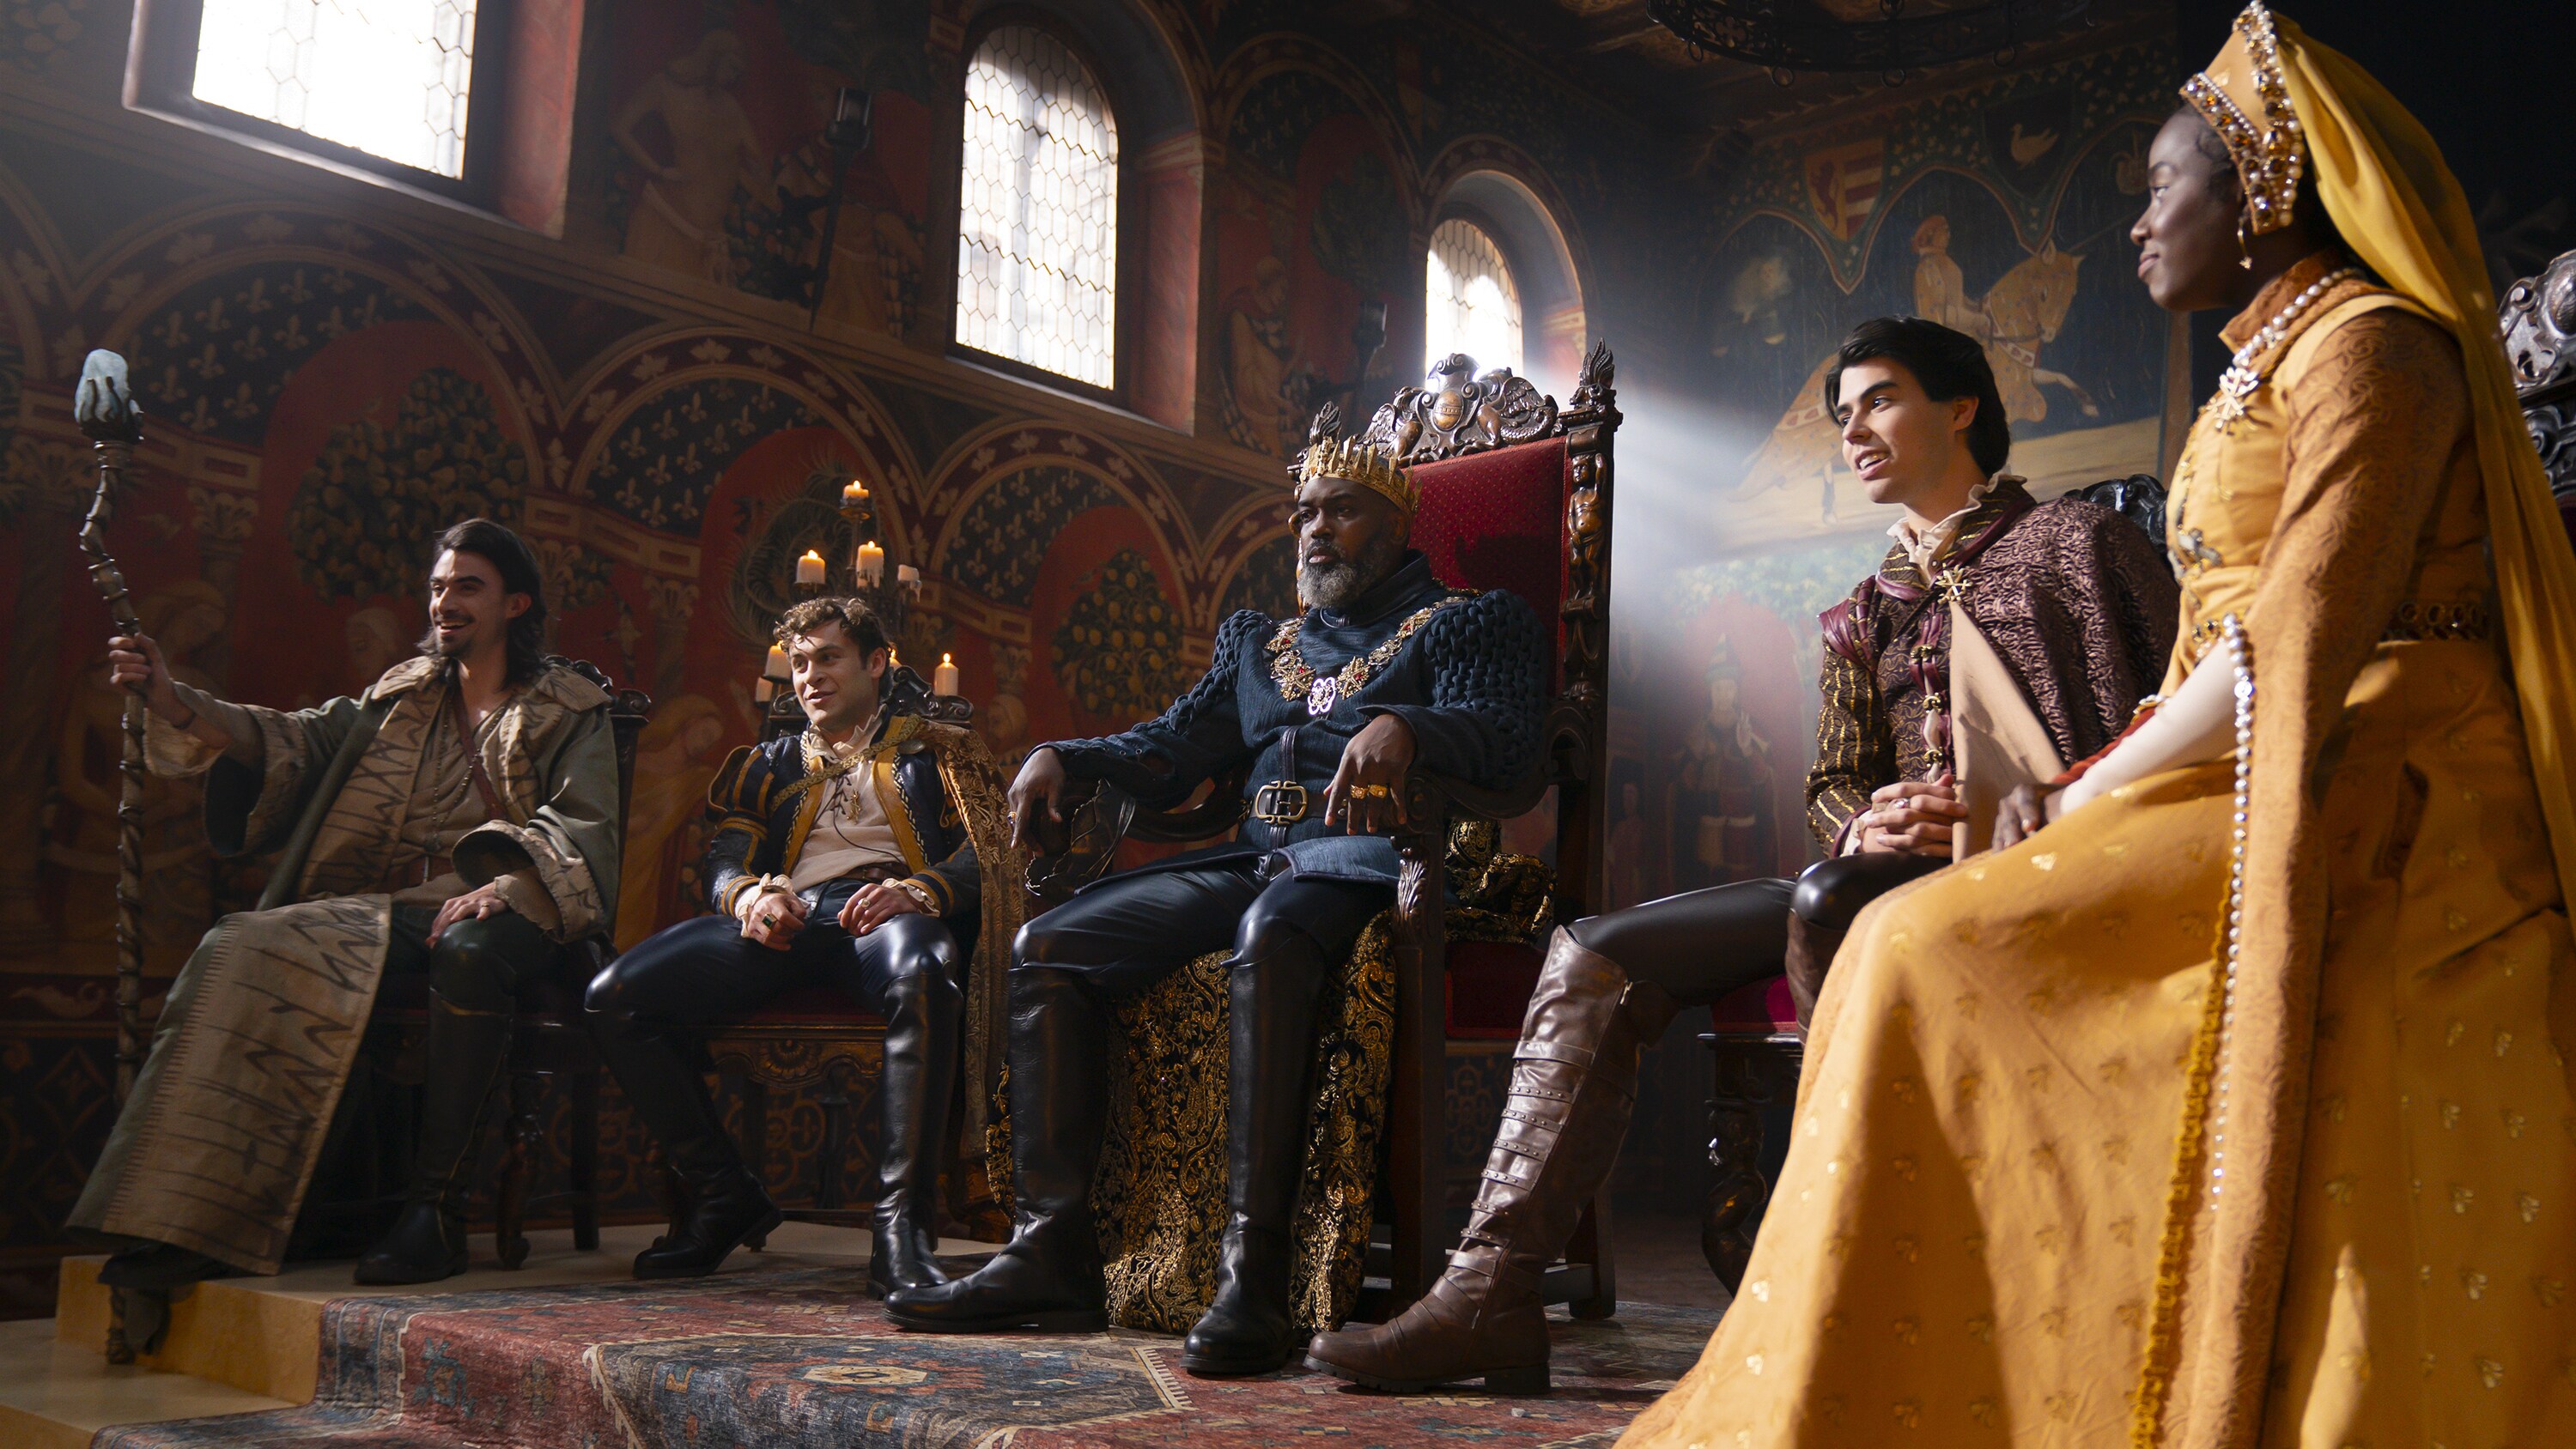 THE QUEST - Dravus, Prince Cedric, King Silas, Prince Emmett, and Princess Adaline await to hear from the heroes summoned by the fates. (Disney/Allyson Riggs)